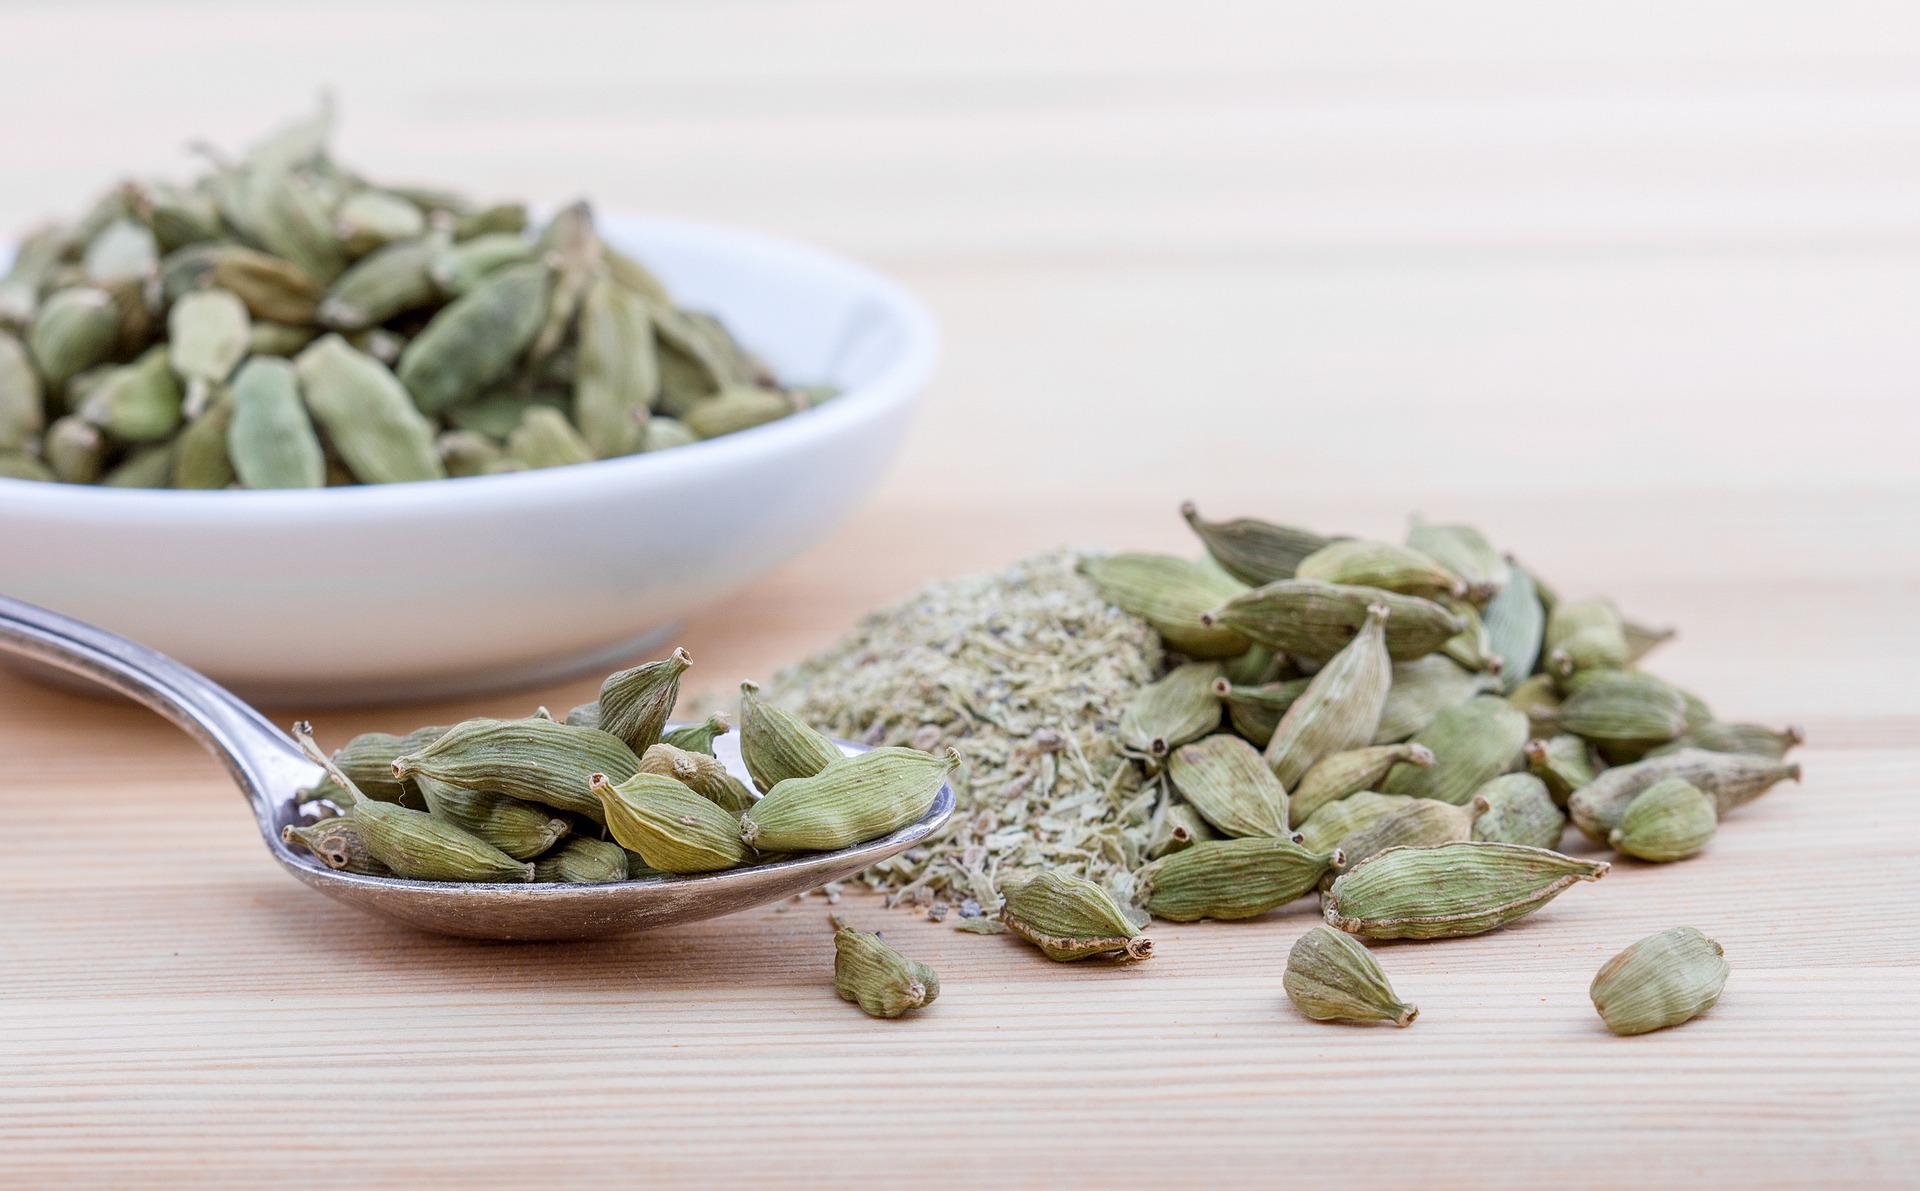 What Does Cardamom Smell Like?